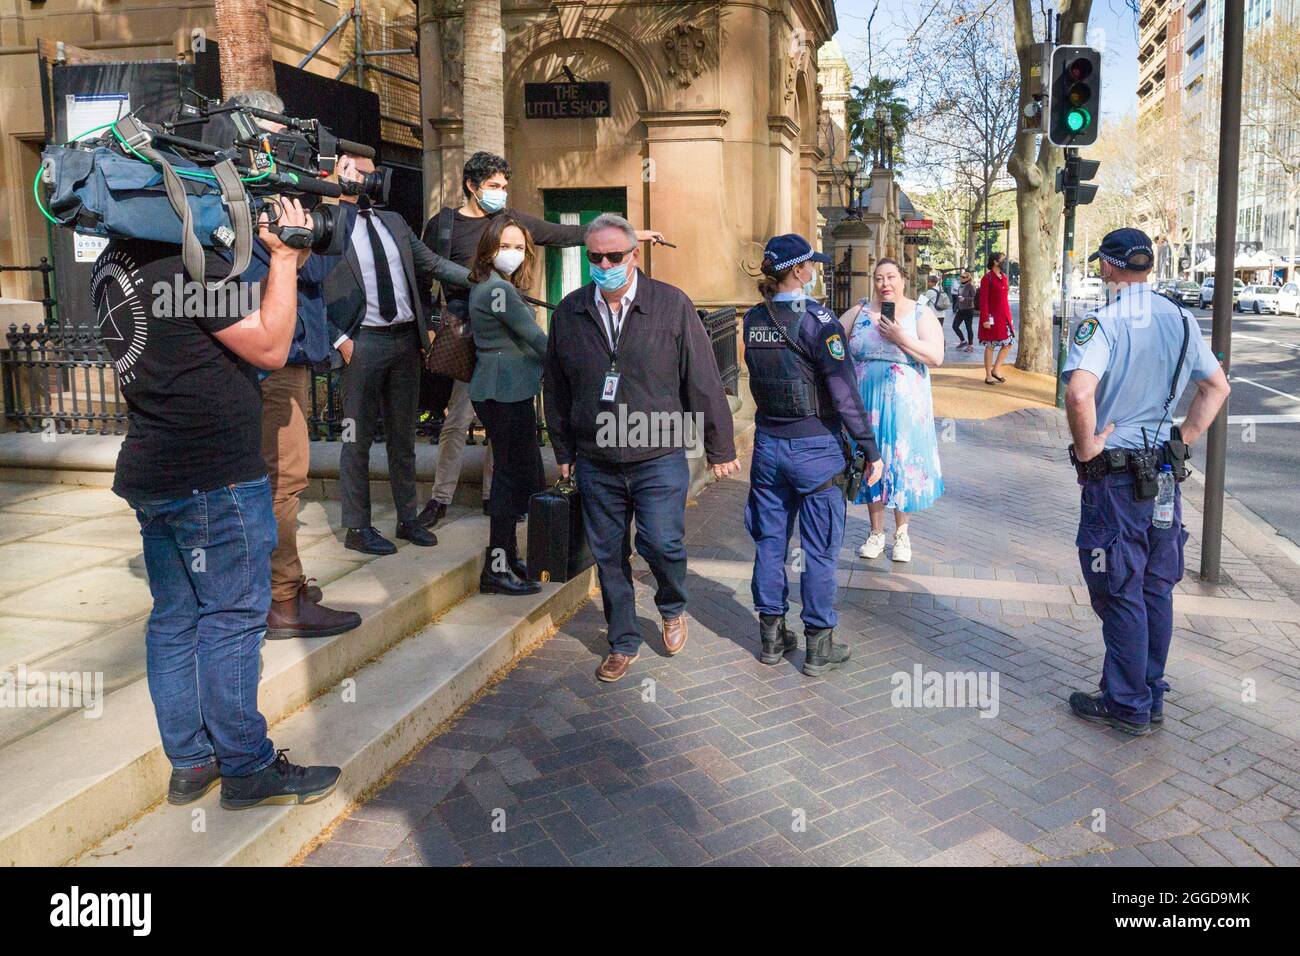 Sydney, Australia. 31 Aug 2021. Mark Latham, the leader of the 'One Nation' political party in NSW, Australia, discretely slips unnoticed past a media throng filming a woman's arrest on Macquarie Street at NSW Parliament House. The woman's arrest came about when she attended a demonstration announced by truck drivers frustrated by COVID-19 lockdown restrictions. Despite claims that they intended to blockade the NSW Parliament building, no trucks or drivers arrived. Credit: Robert Wallace / Wallace Media Network / Alamy Live News Stock Photo